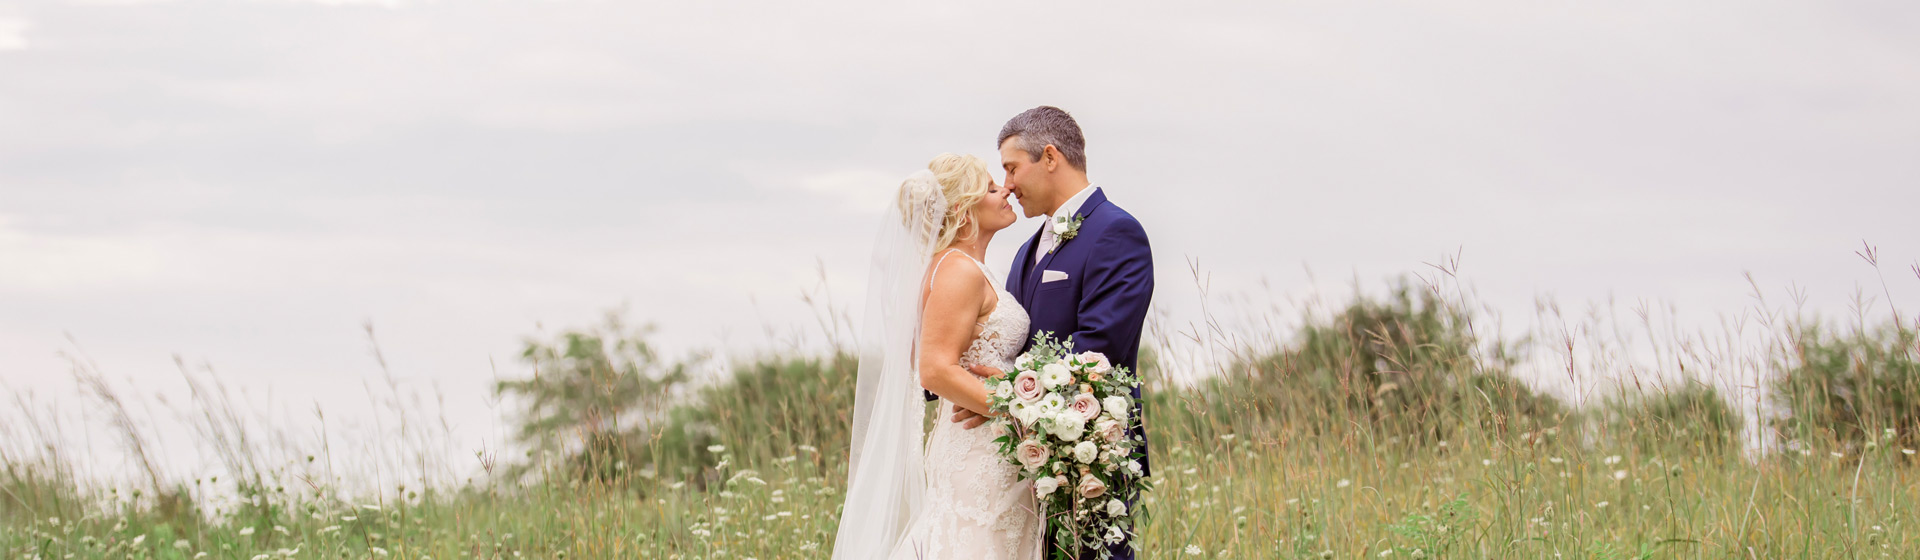 Bride and Groom in a long grassy field with Queen Anne's Lace